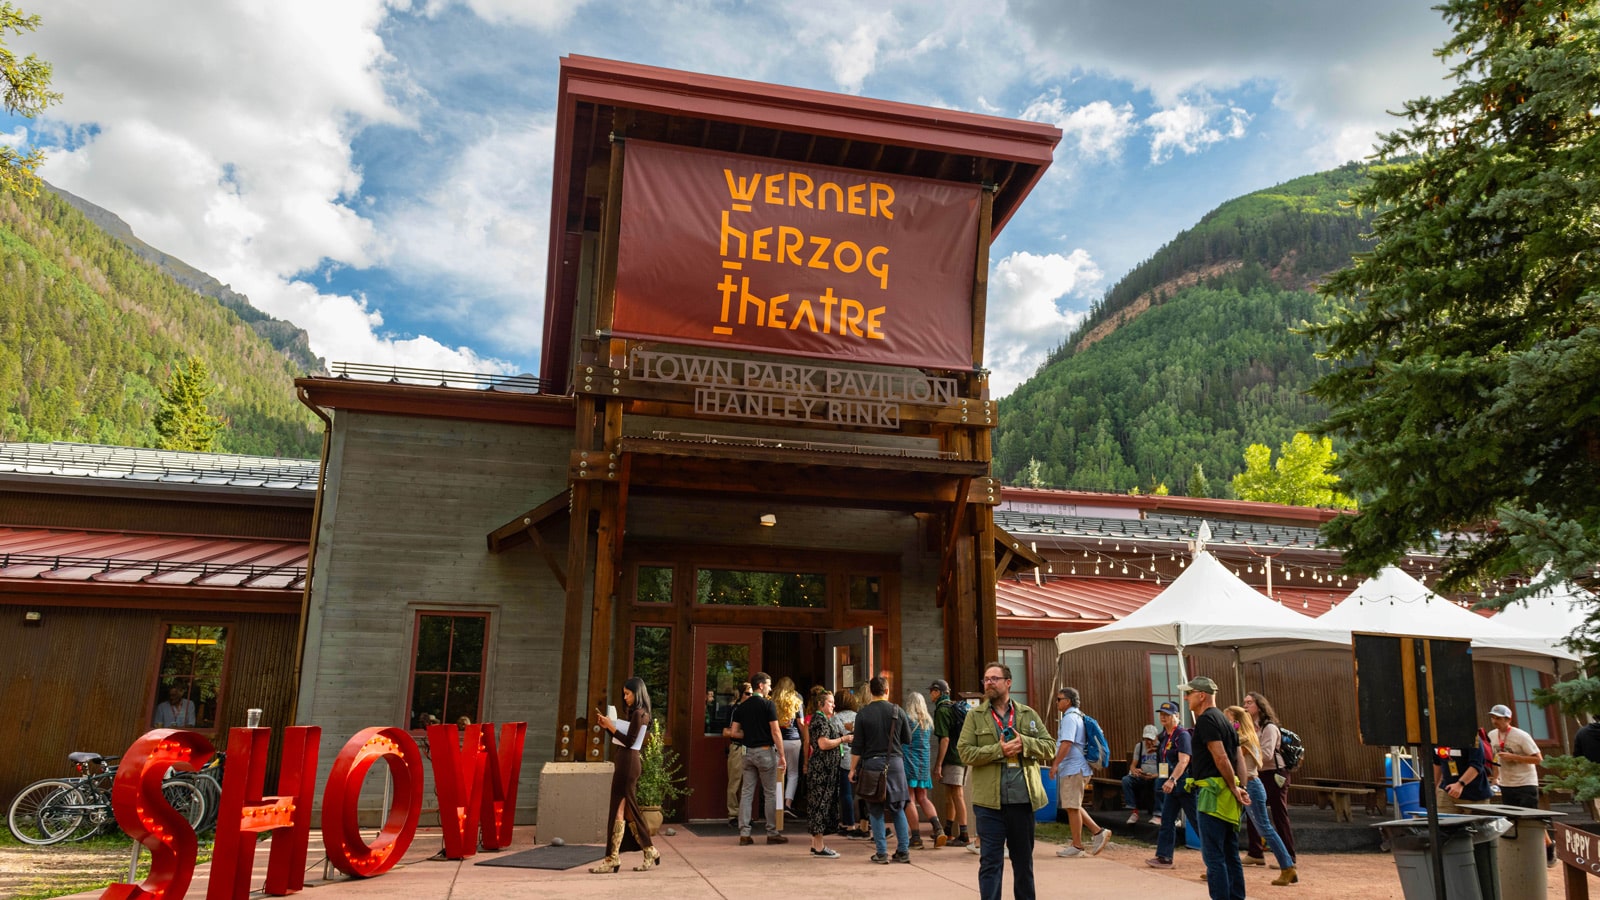 Meyer Sound Joins the Celebrations for Telluride Film Festival’s 50th Anniversary